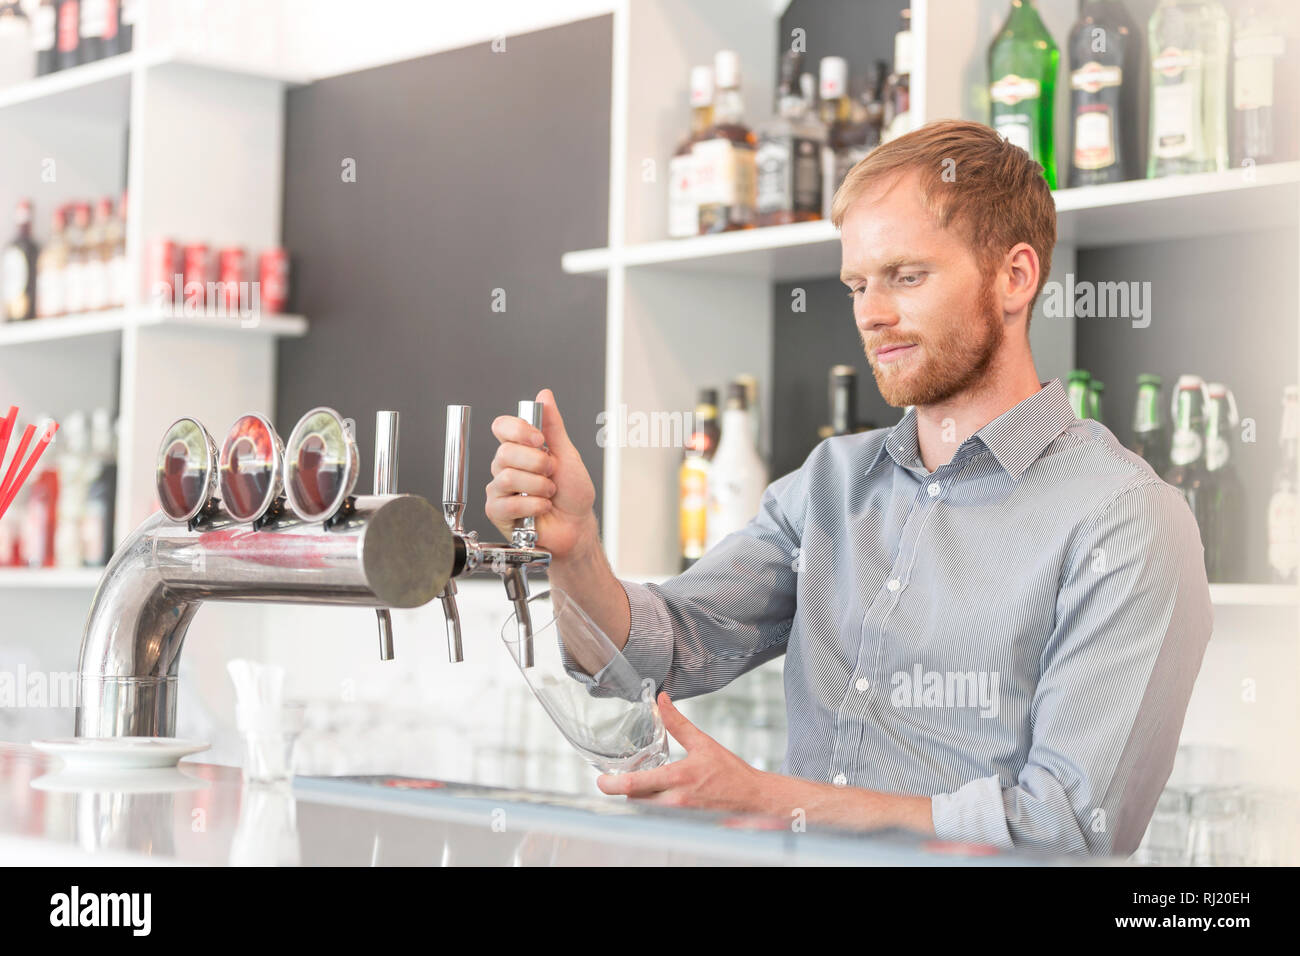 Young Waiter Filling Glass From Beer Tap At Restaurant Stock Photo